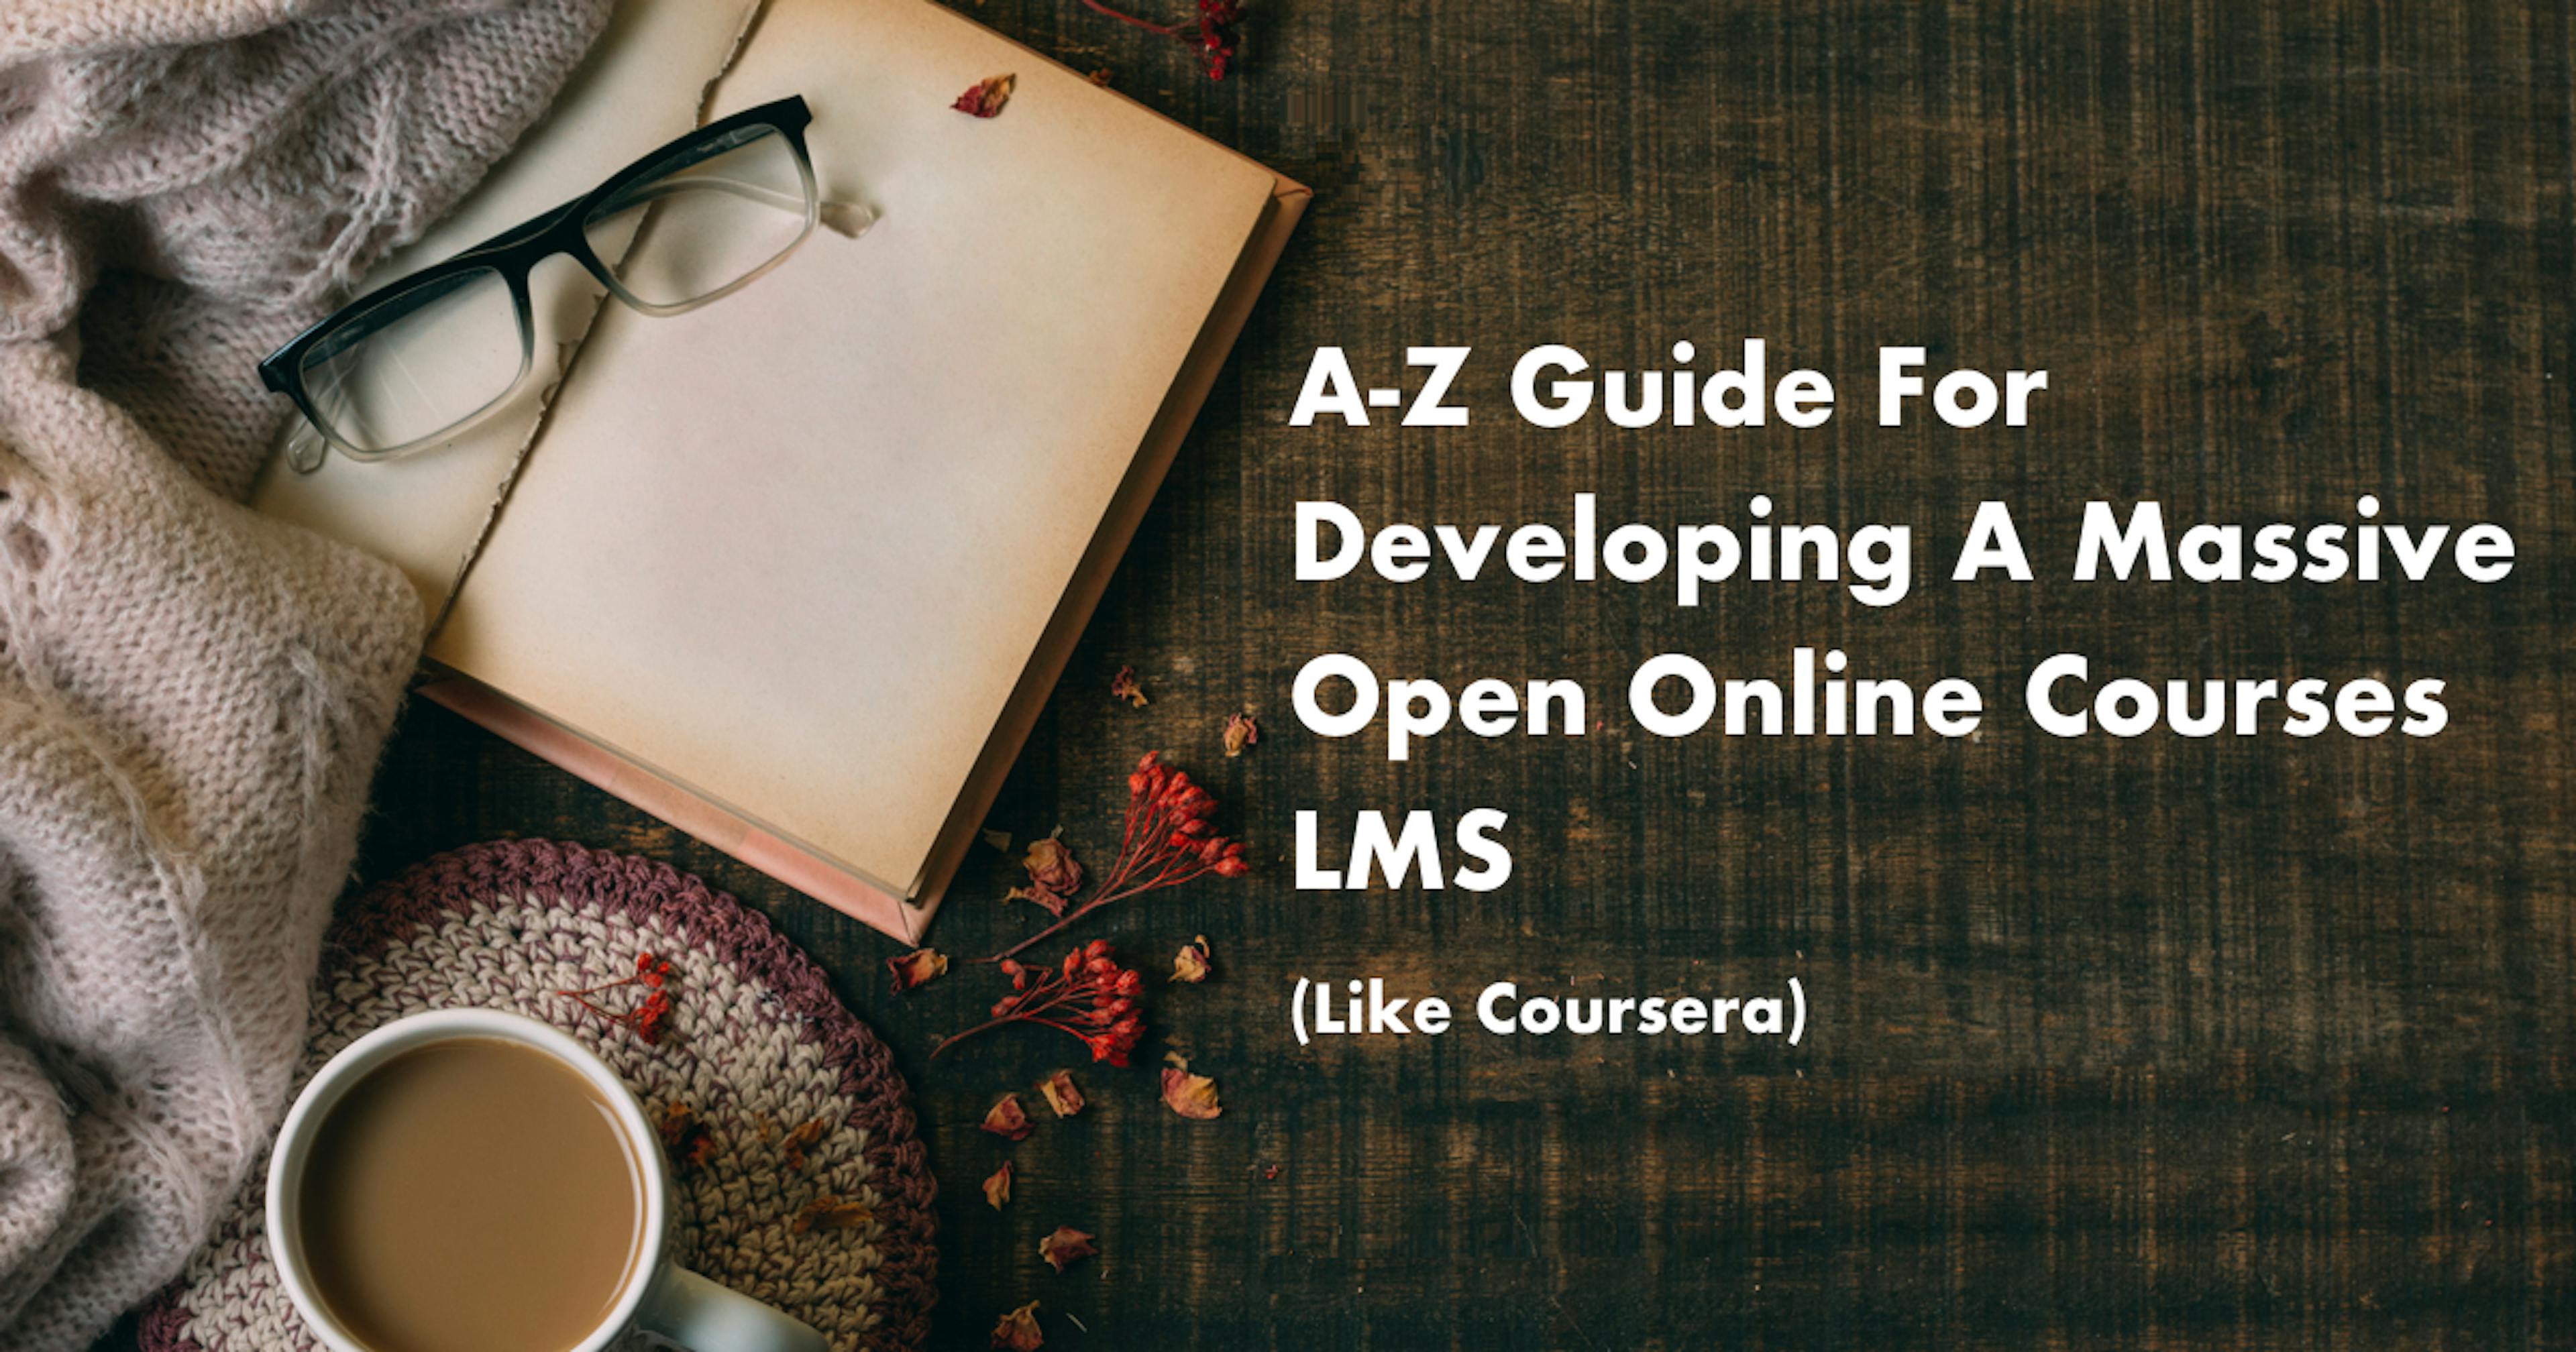 featured image - A-Z Guide For Developing A MOOC LMS [Like Coursera]